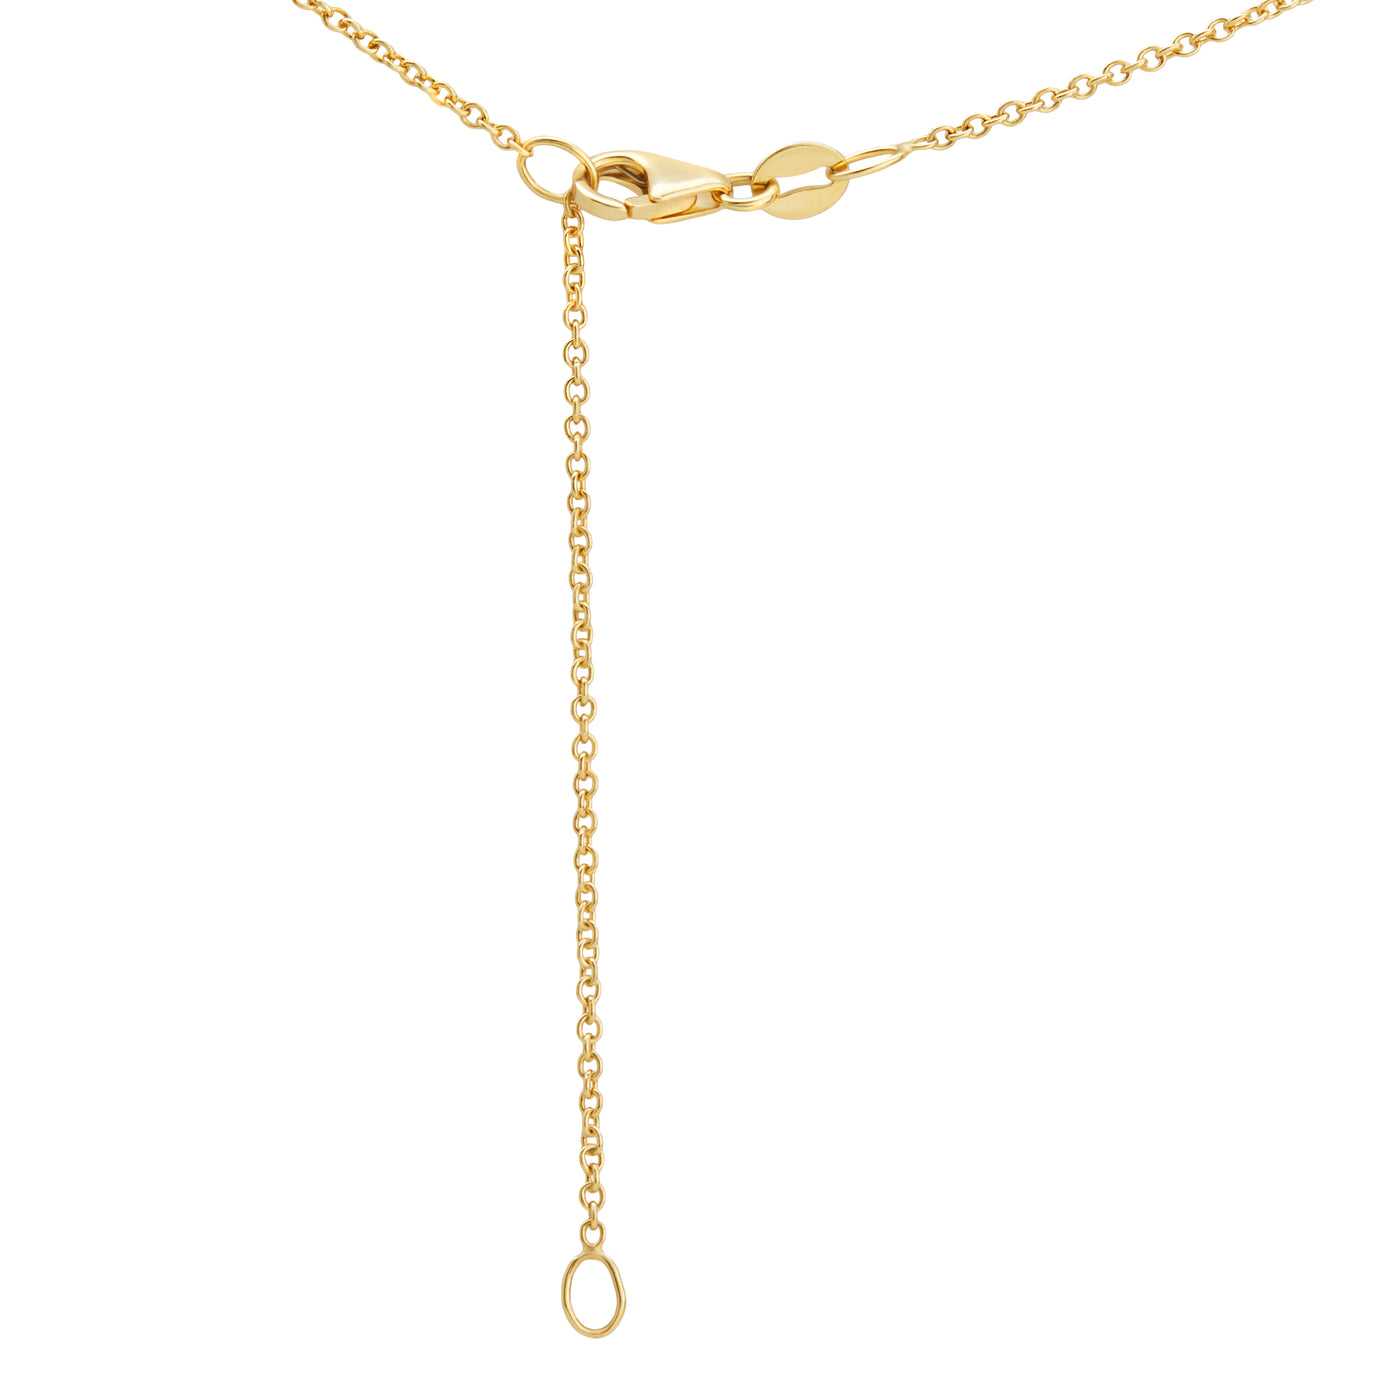 The back part of a yellow gold necklace featuring a 16 inch closure option and an 18 inch closure option.